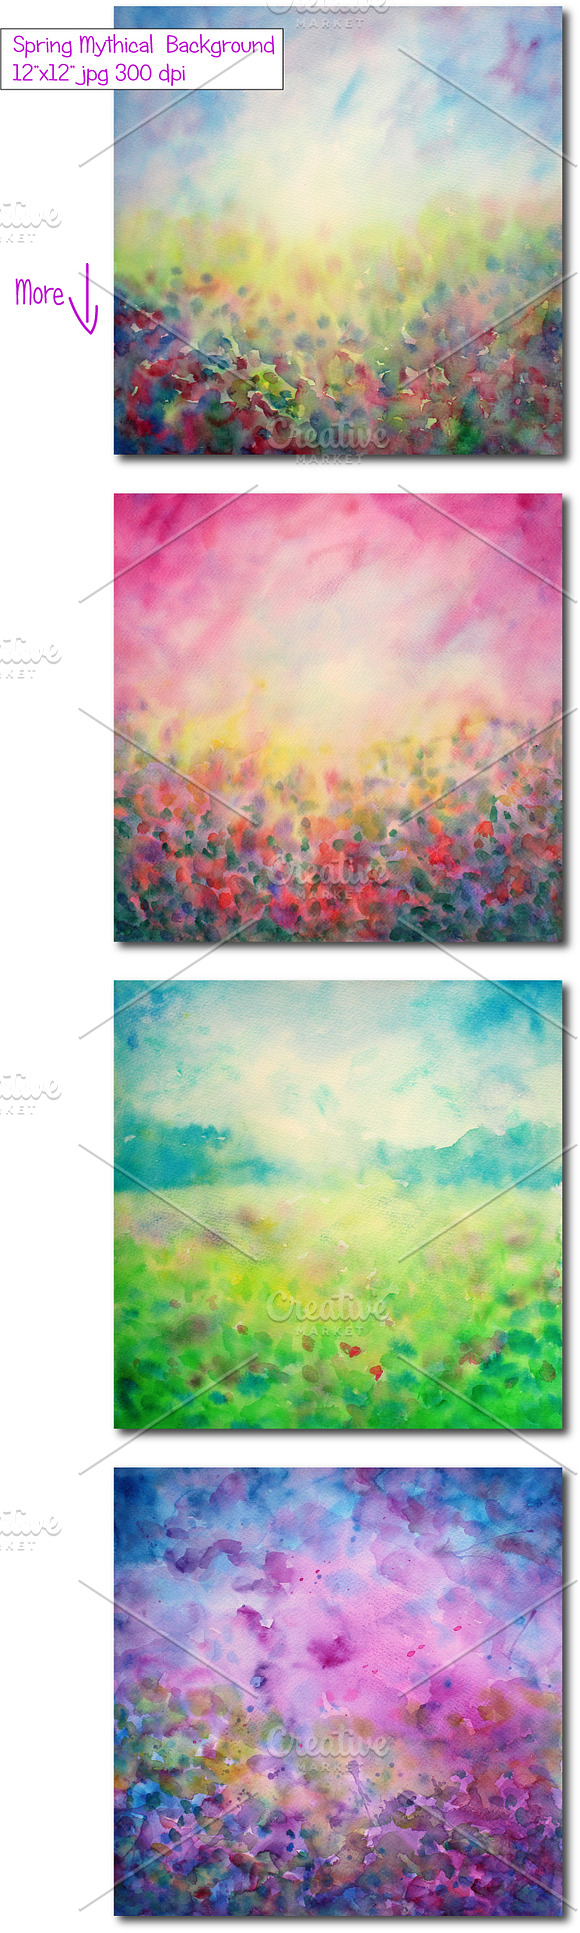 Abstract Mythical Landscape Art in Illustrations - product preview 1